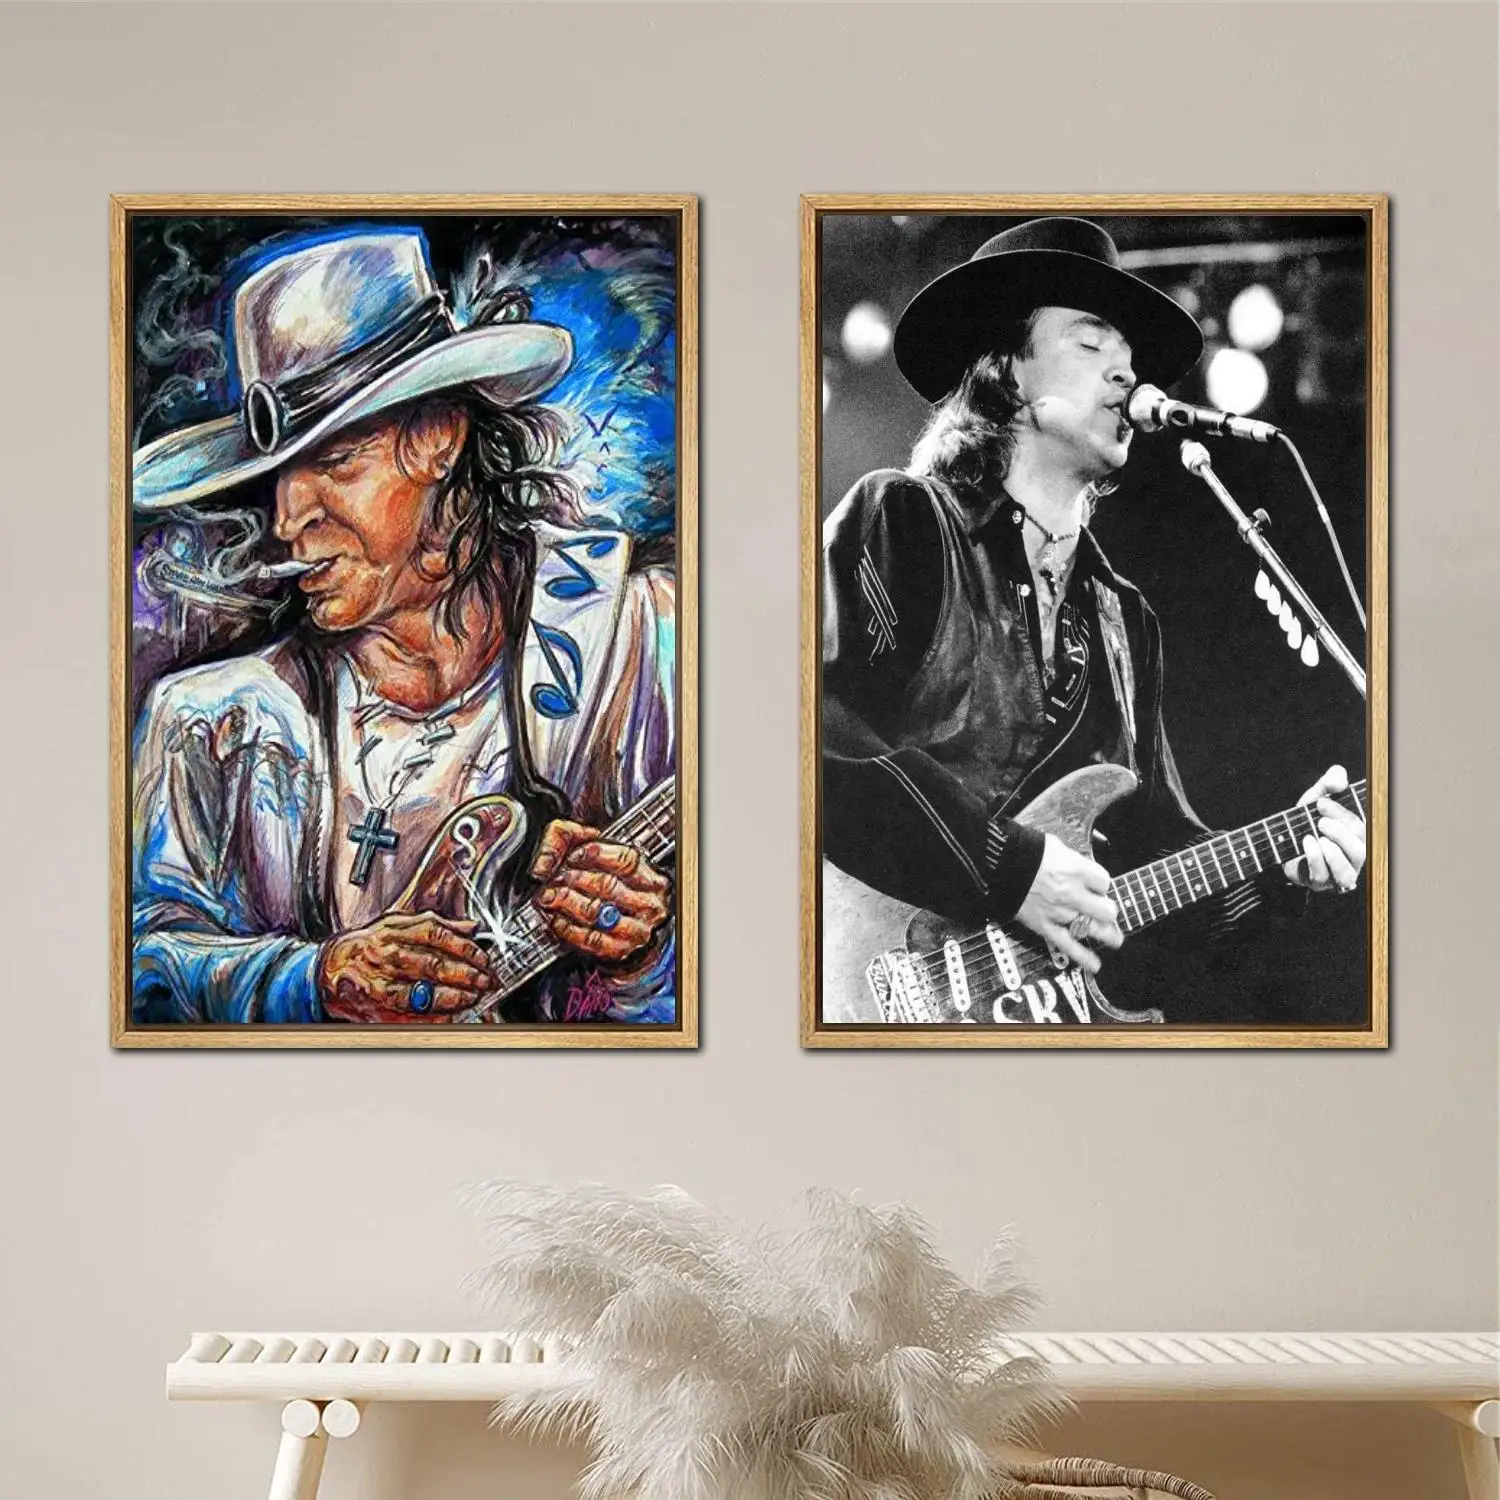 

Stevie Ray Vaughan Double Trouble Painting 24x36 Wall Art Canvas Posters room Modern Family bedroom Decoration Art wall decor